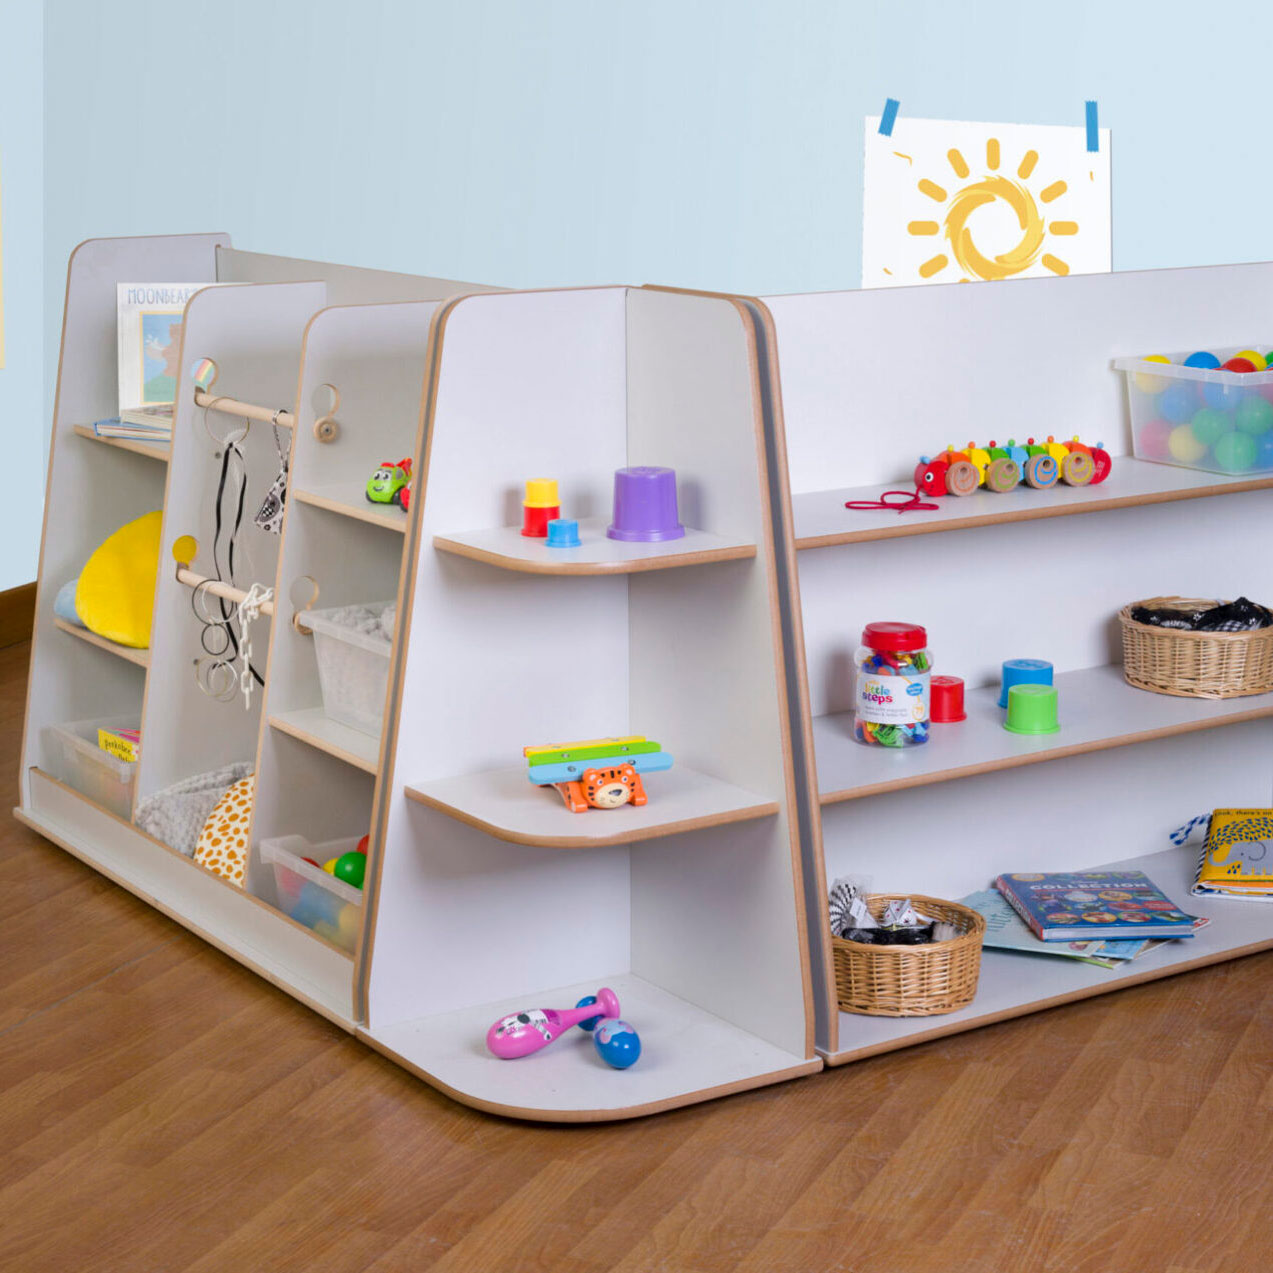 Twoey Junior Library Furniture